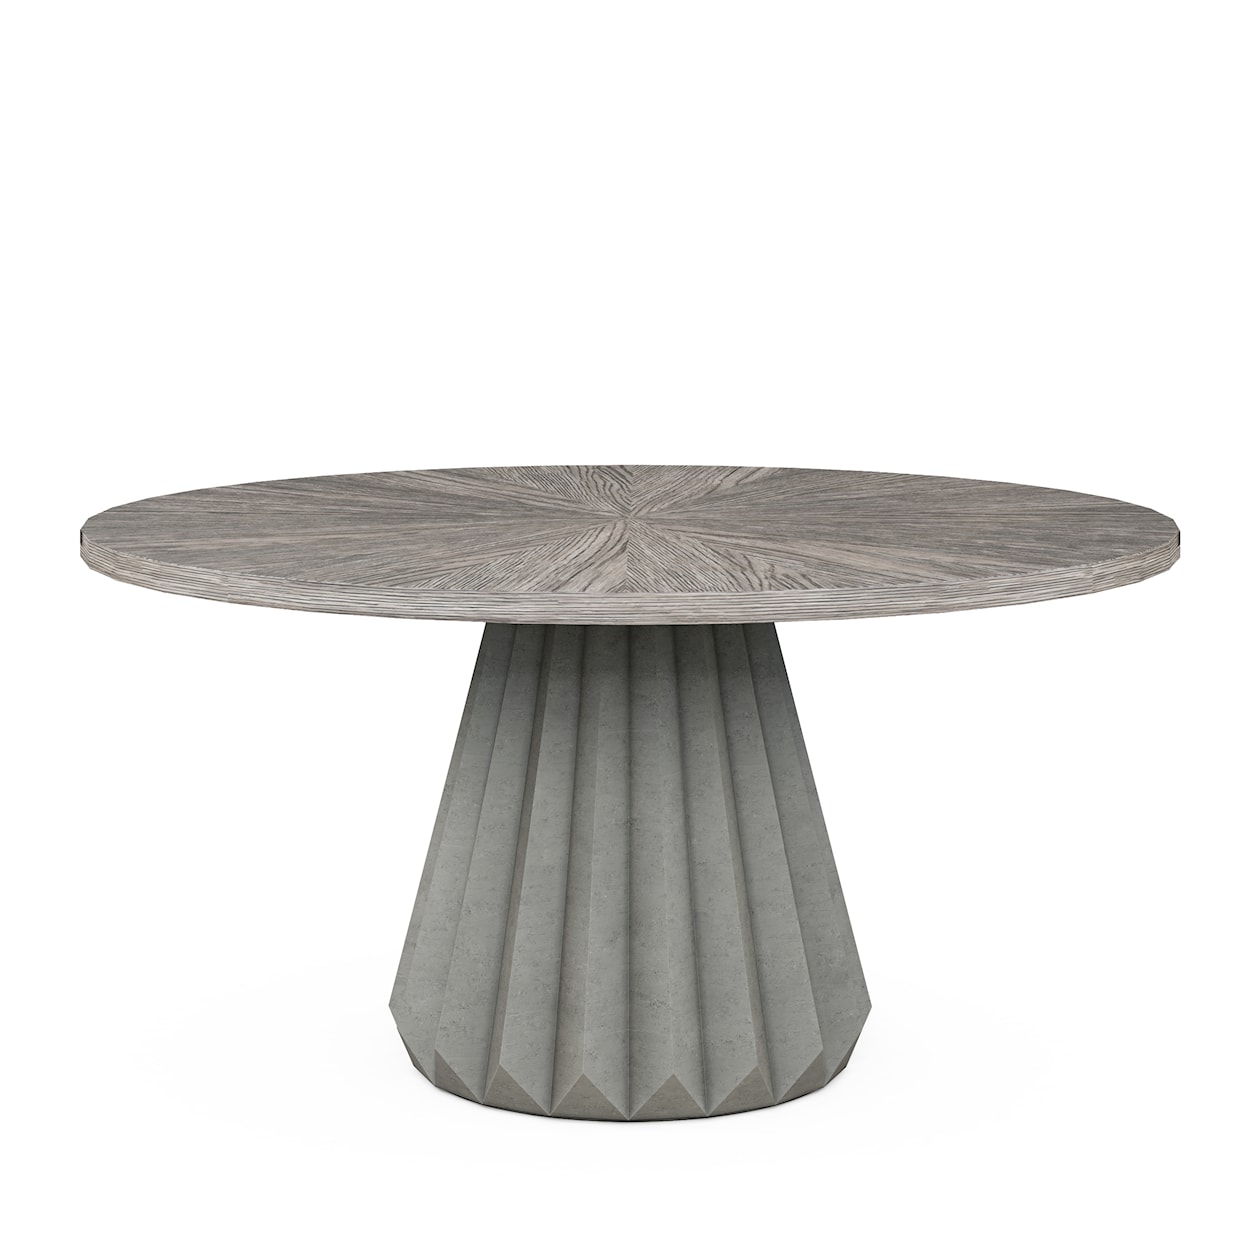 A.R.T. Furniture Inc Vault Round Dining Table